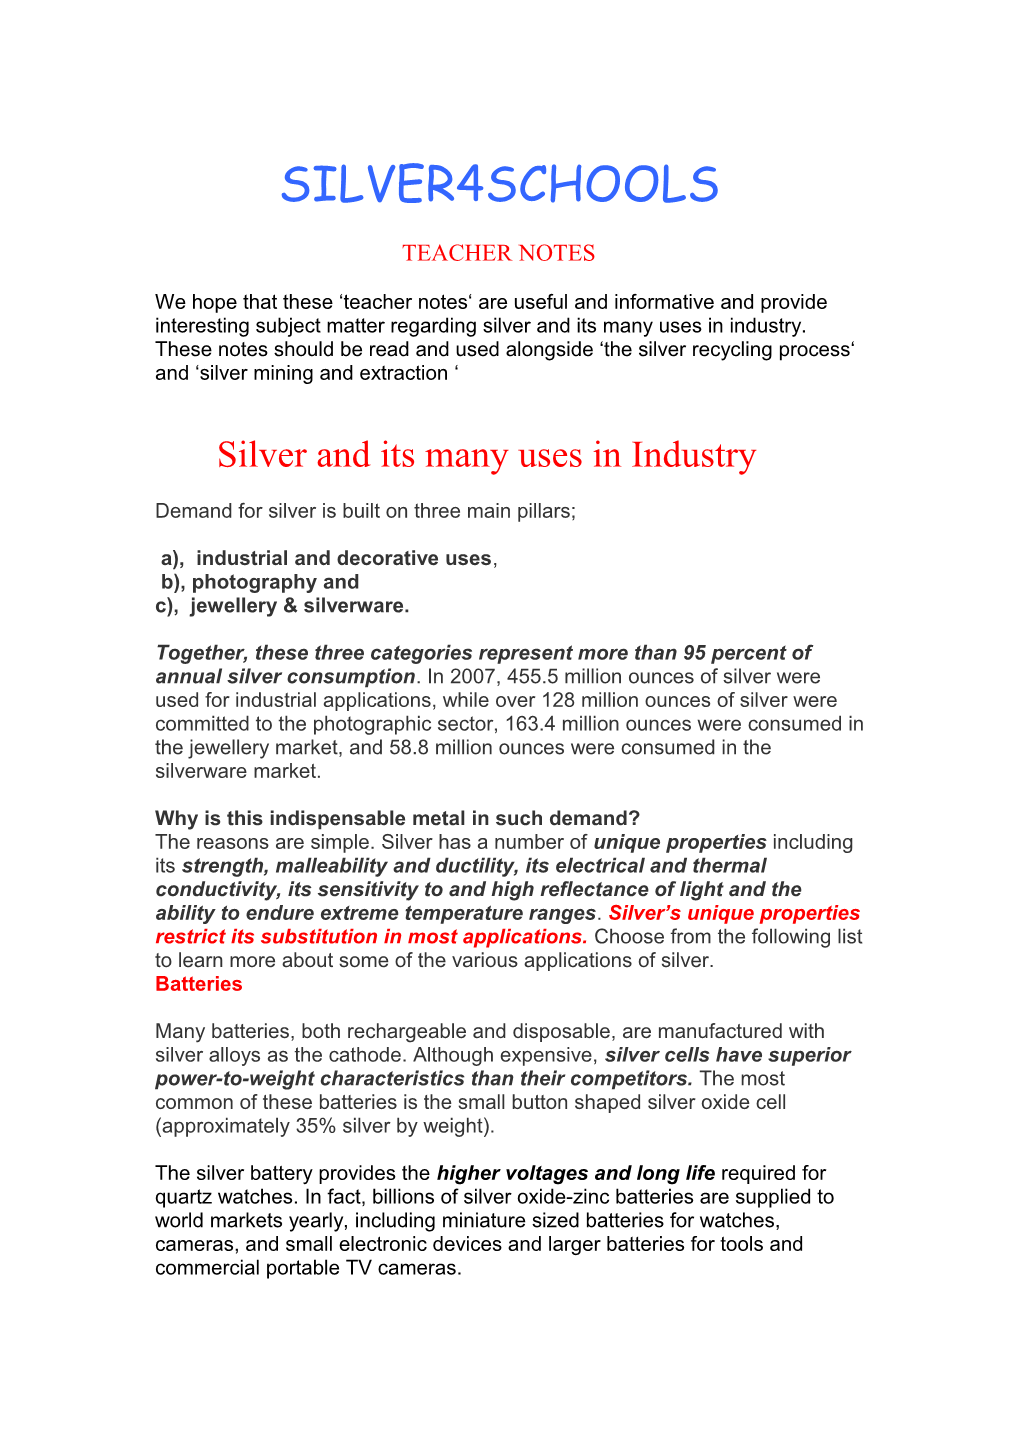 Demand for Silver Is Built on Three Main Pillars; Industrial and Decorative Uses, Photography